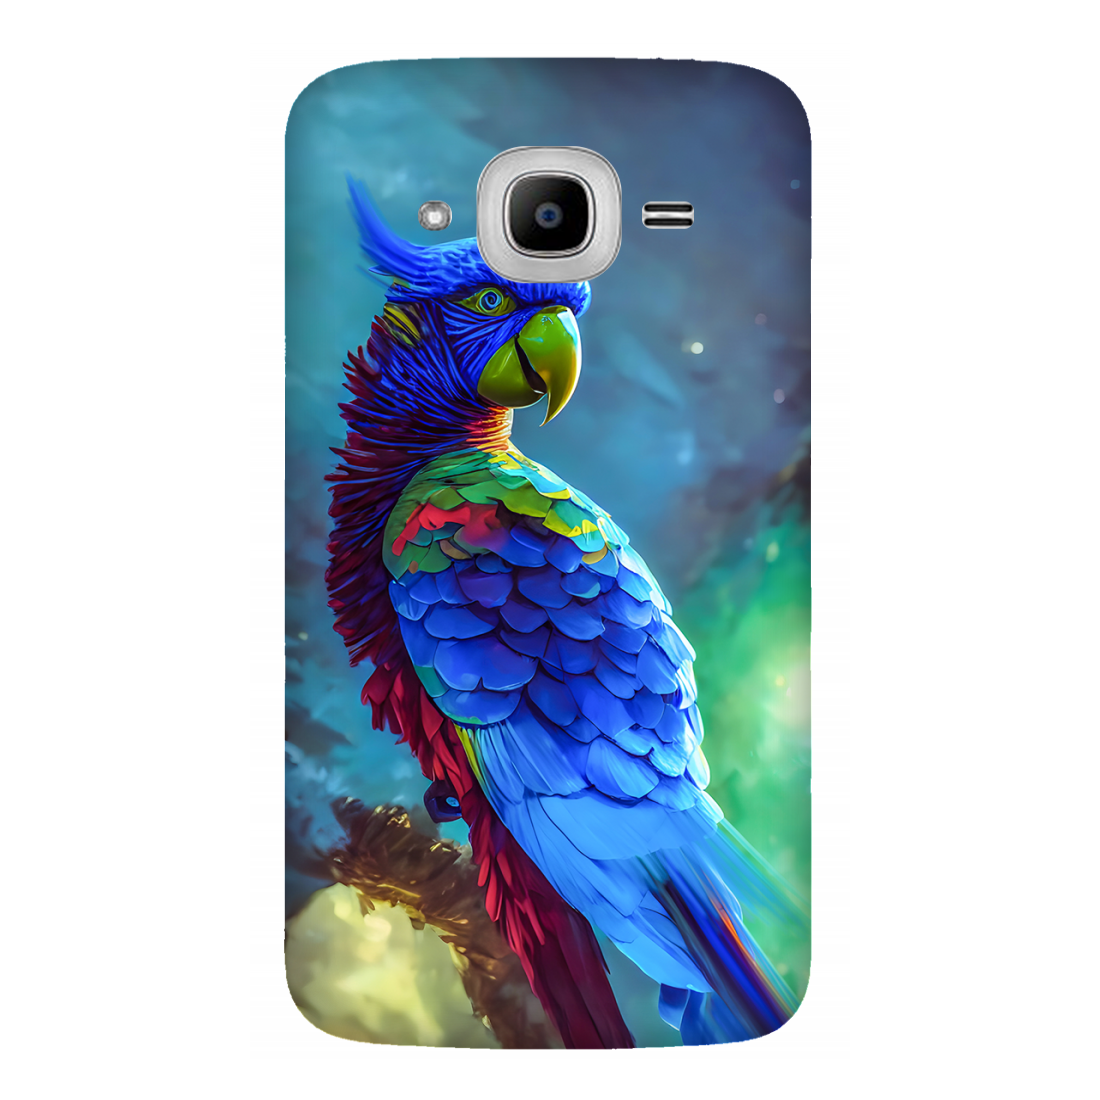 Vibrant Parrot in Dreamy Atmosphere Case Samsung Galaxy J2Pro (2016)